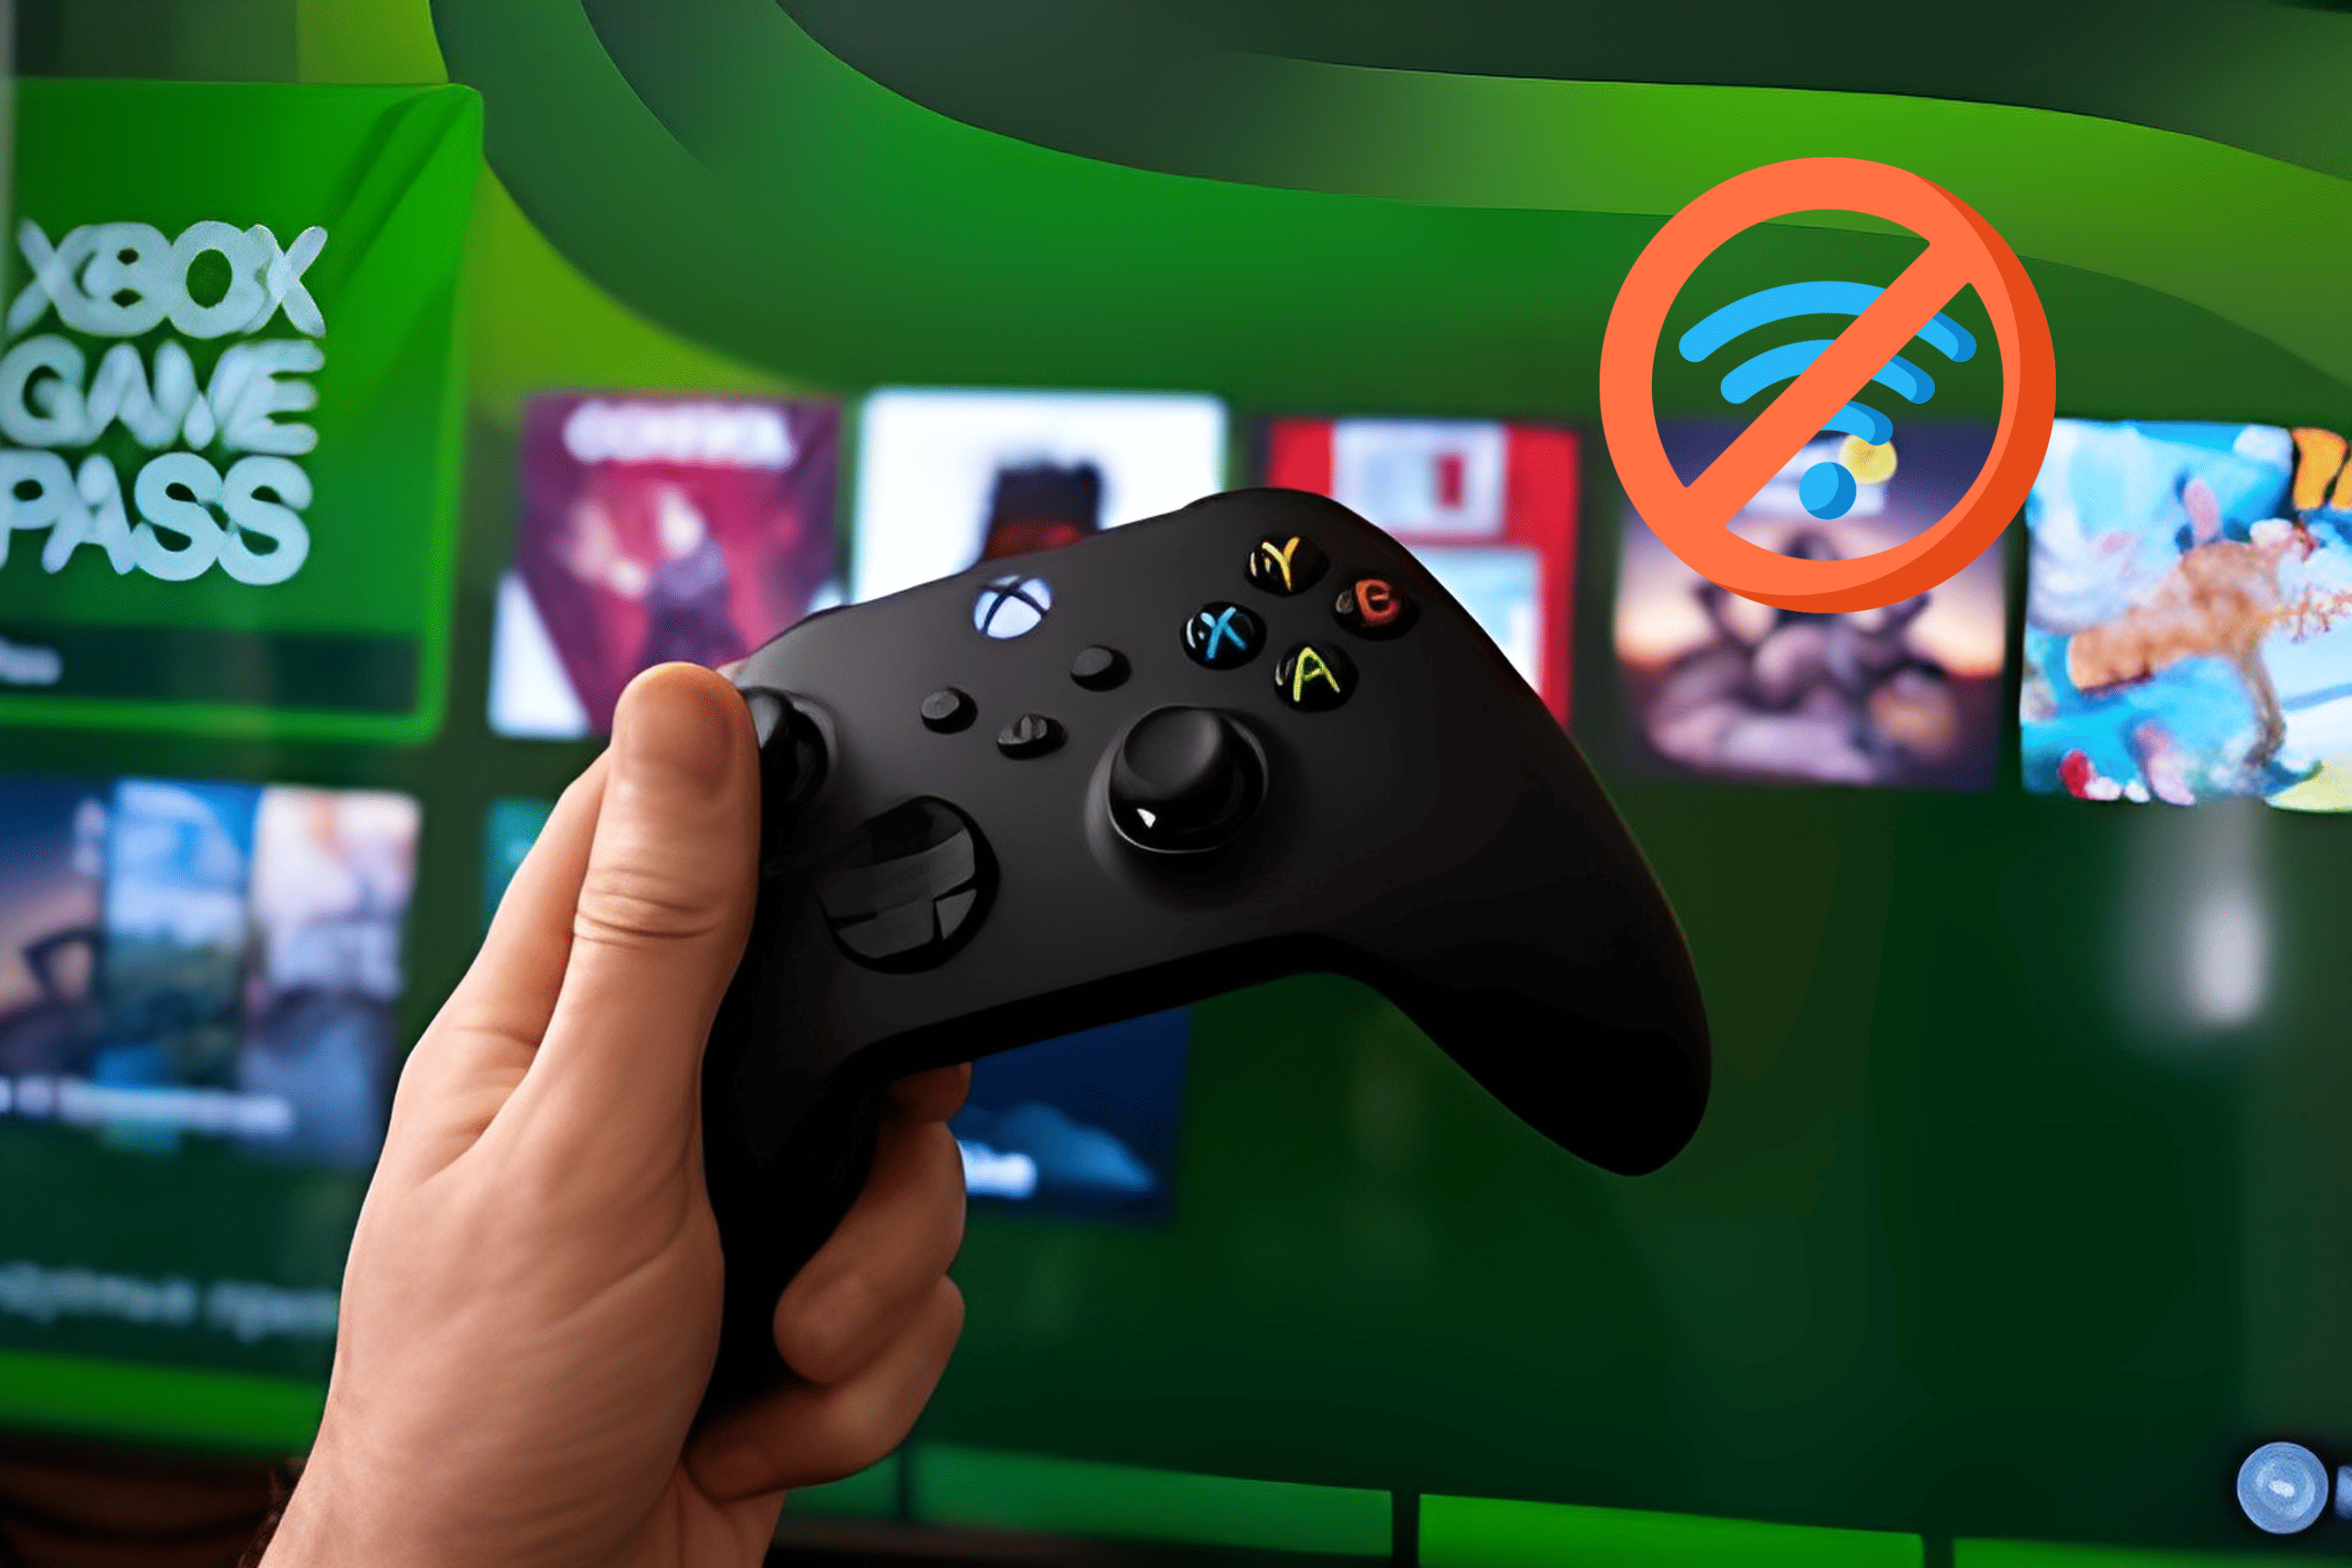 Xbox Series X won’t connect to the internet